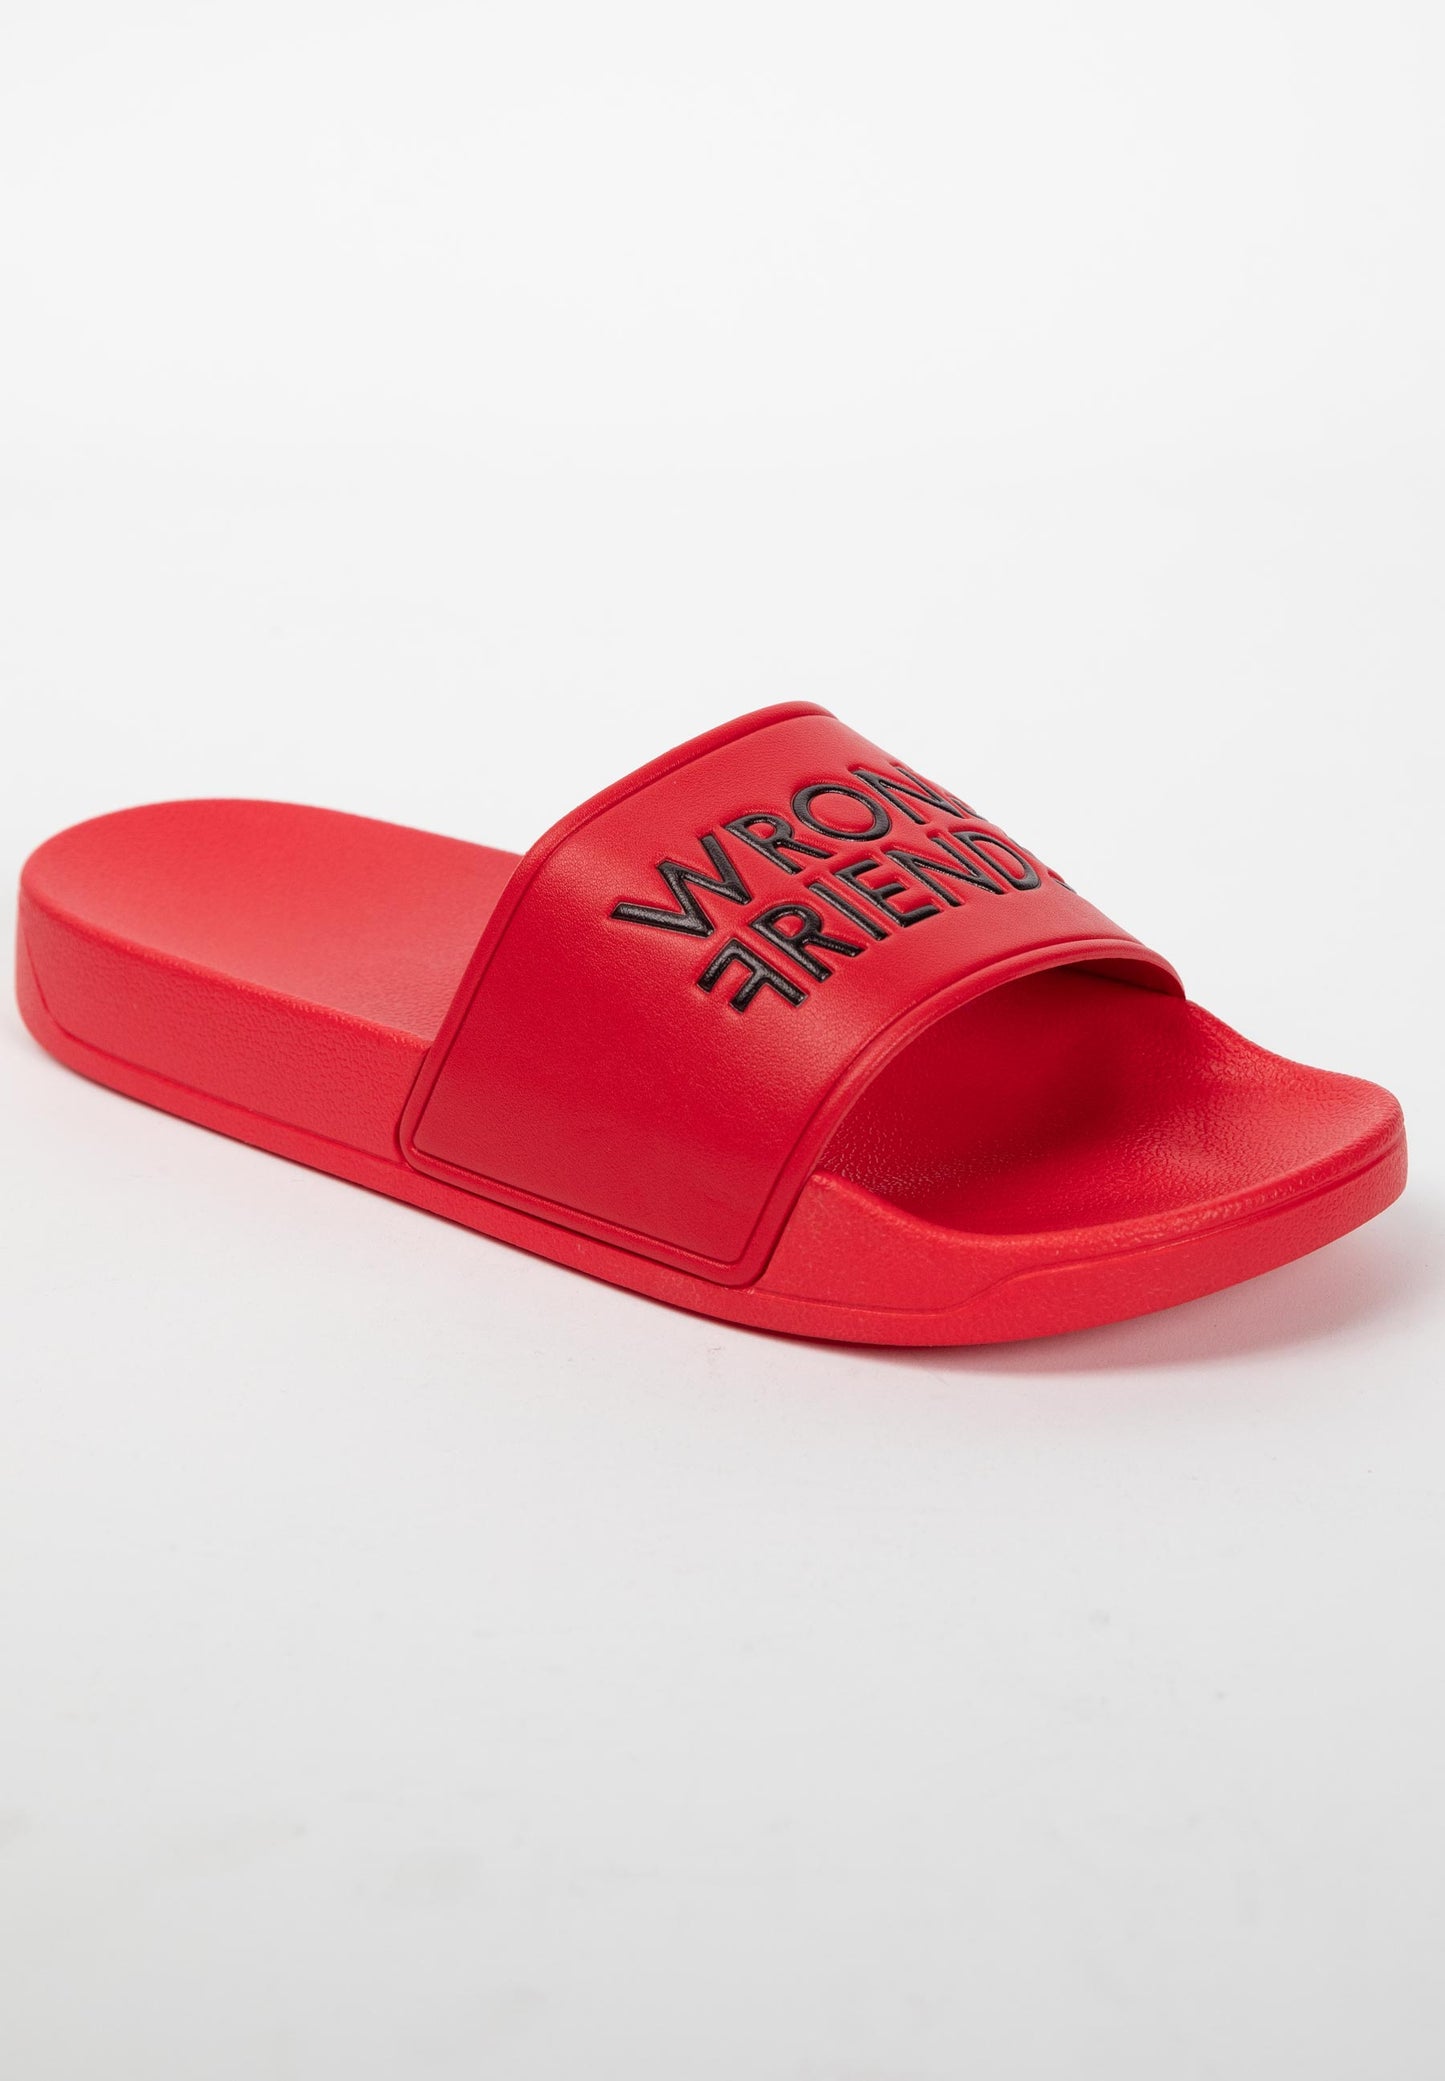 WRONG FRIENDS SLIDES RED